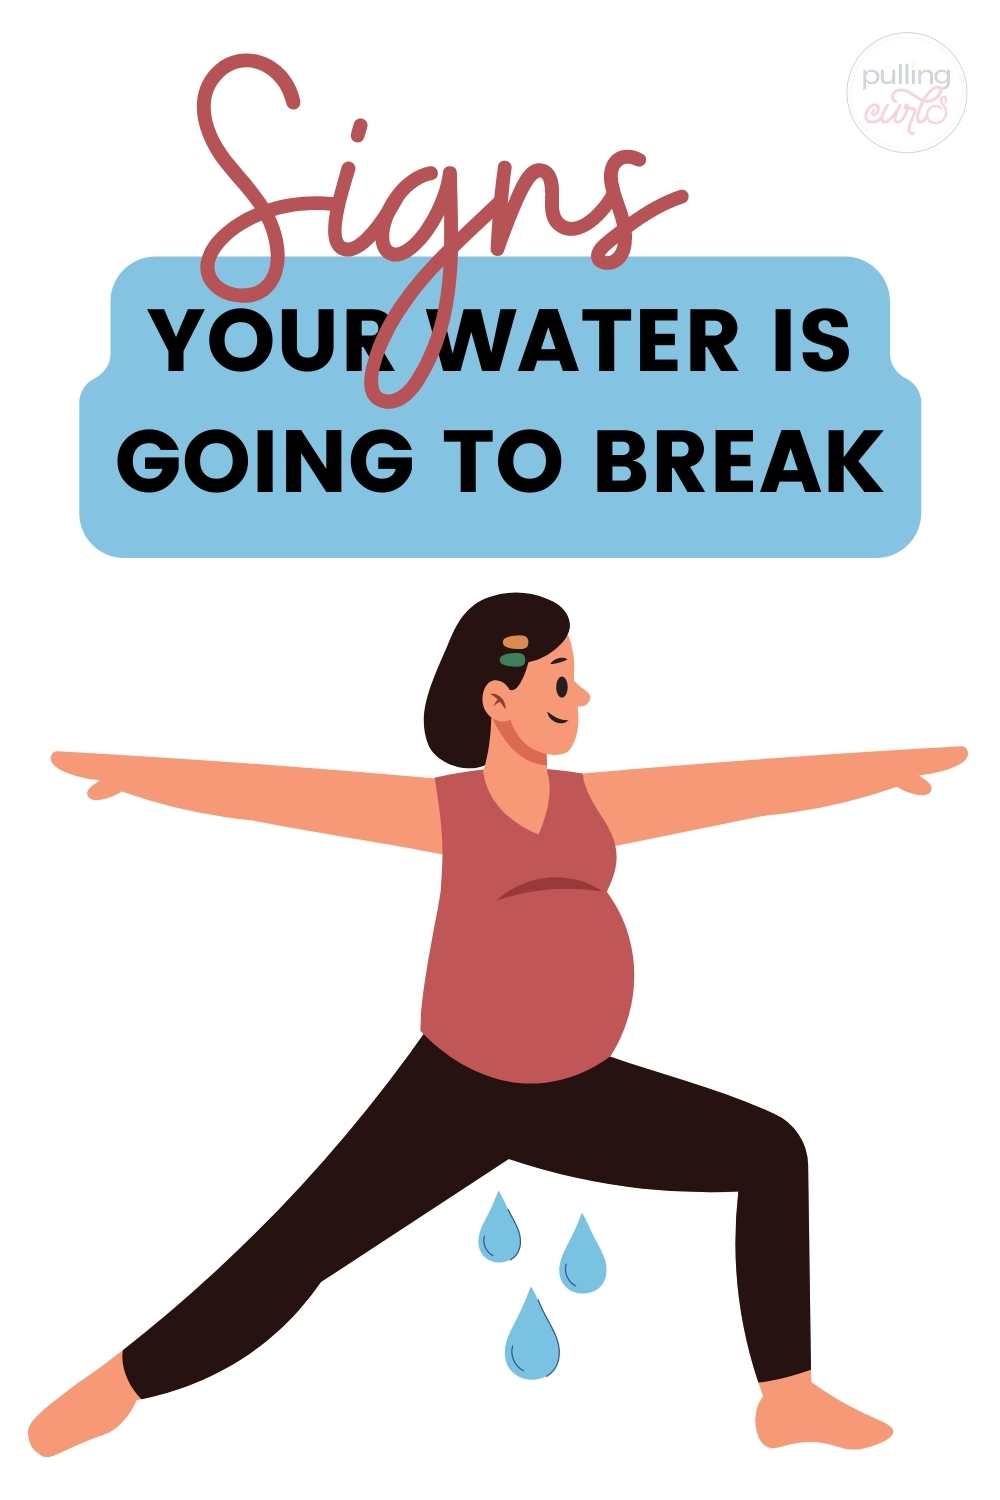 Are you getting close to your due date? Here are four signs that your water might break soon. Knowing what to look for can help put your mind at ease and prepare you for the next step in labor. via @pullingcurls